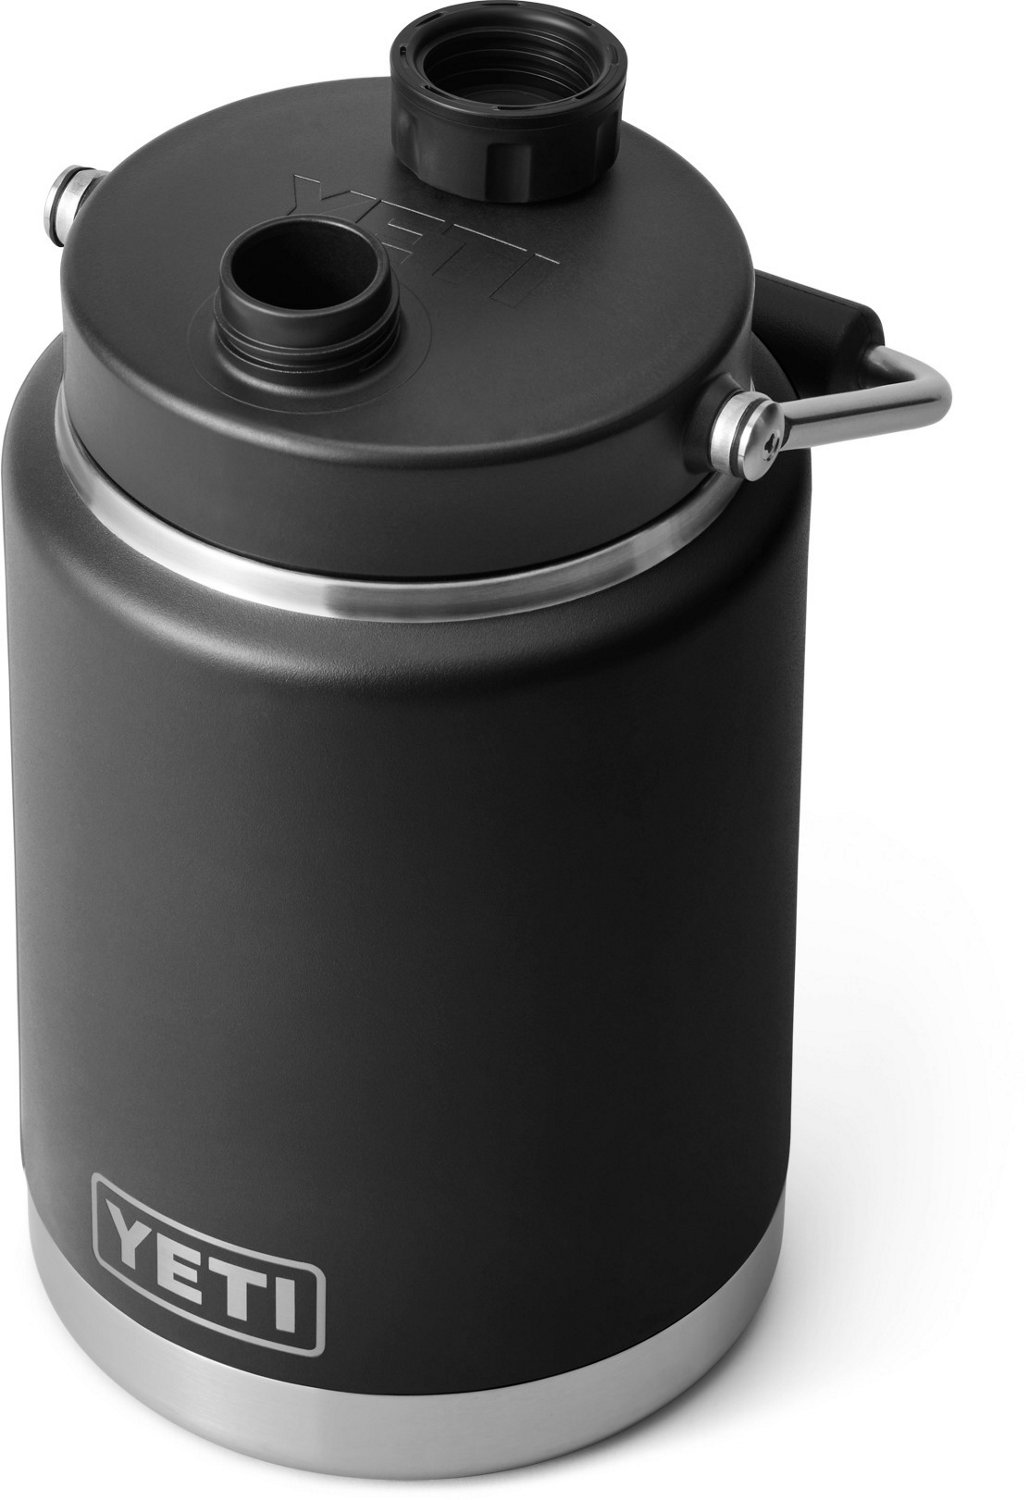 Skin for Yeti Rambler One Gallon Jug - Solid State Black by Solid